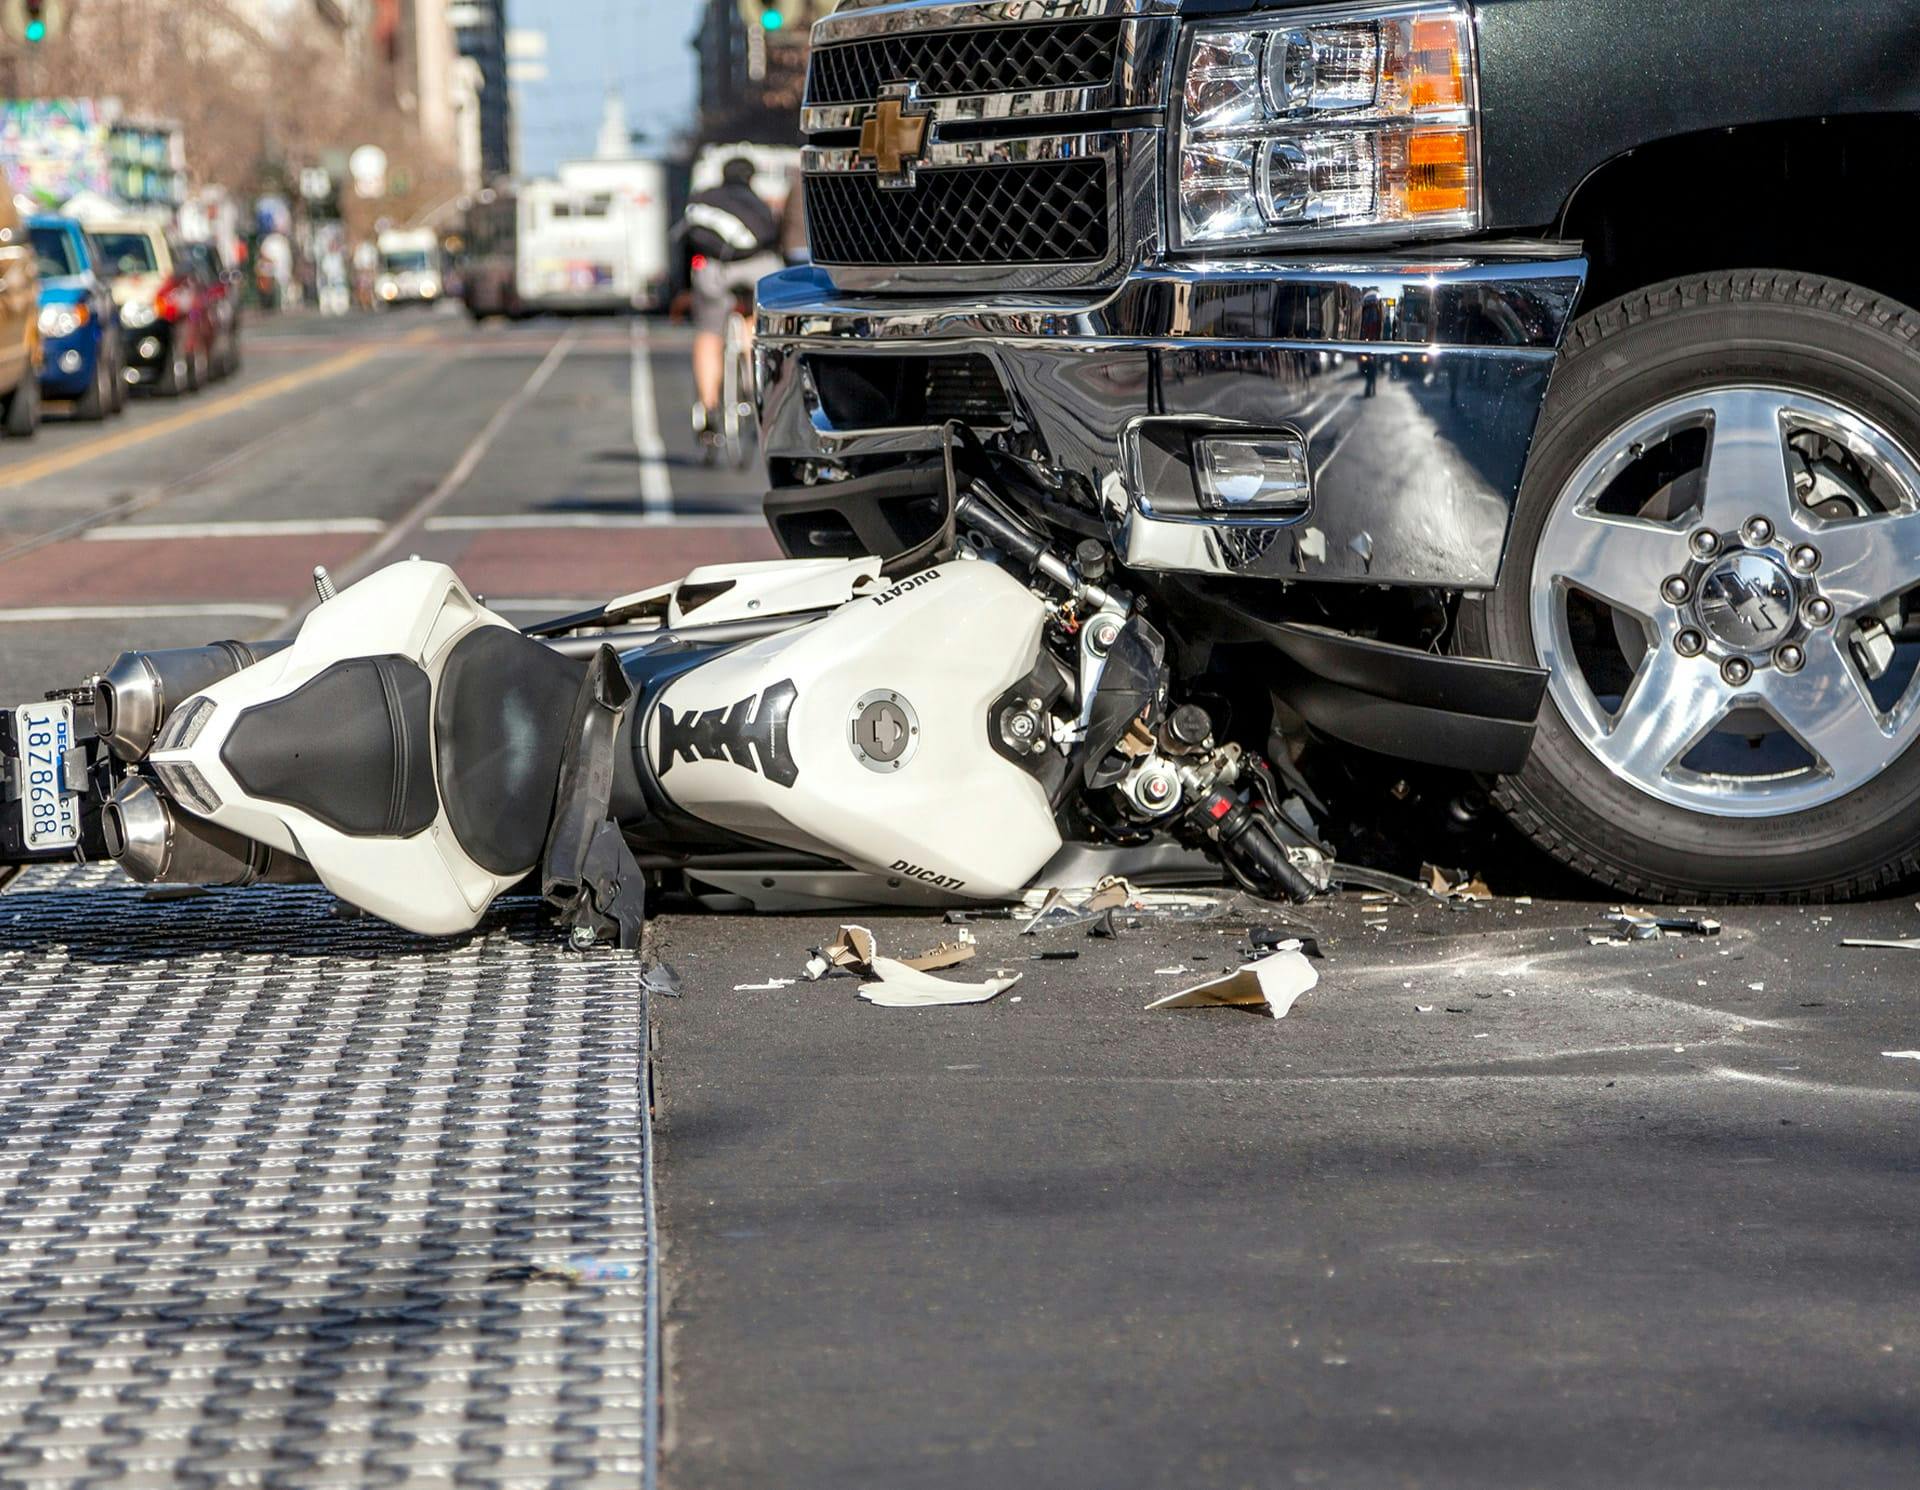 Williamston SC Motorcycle Accident Lawyer